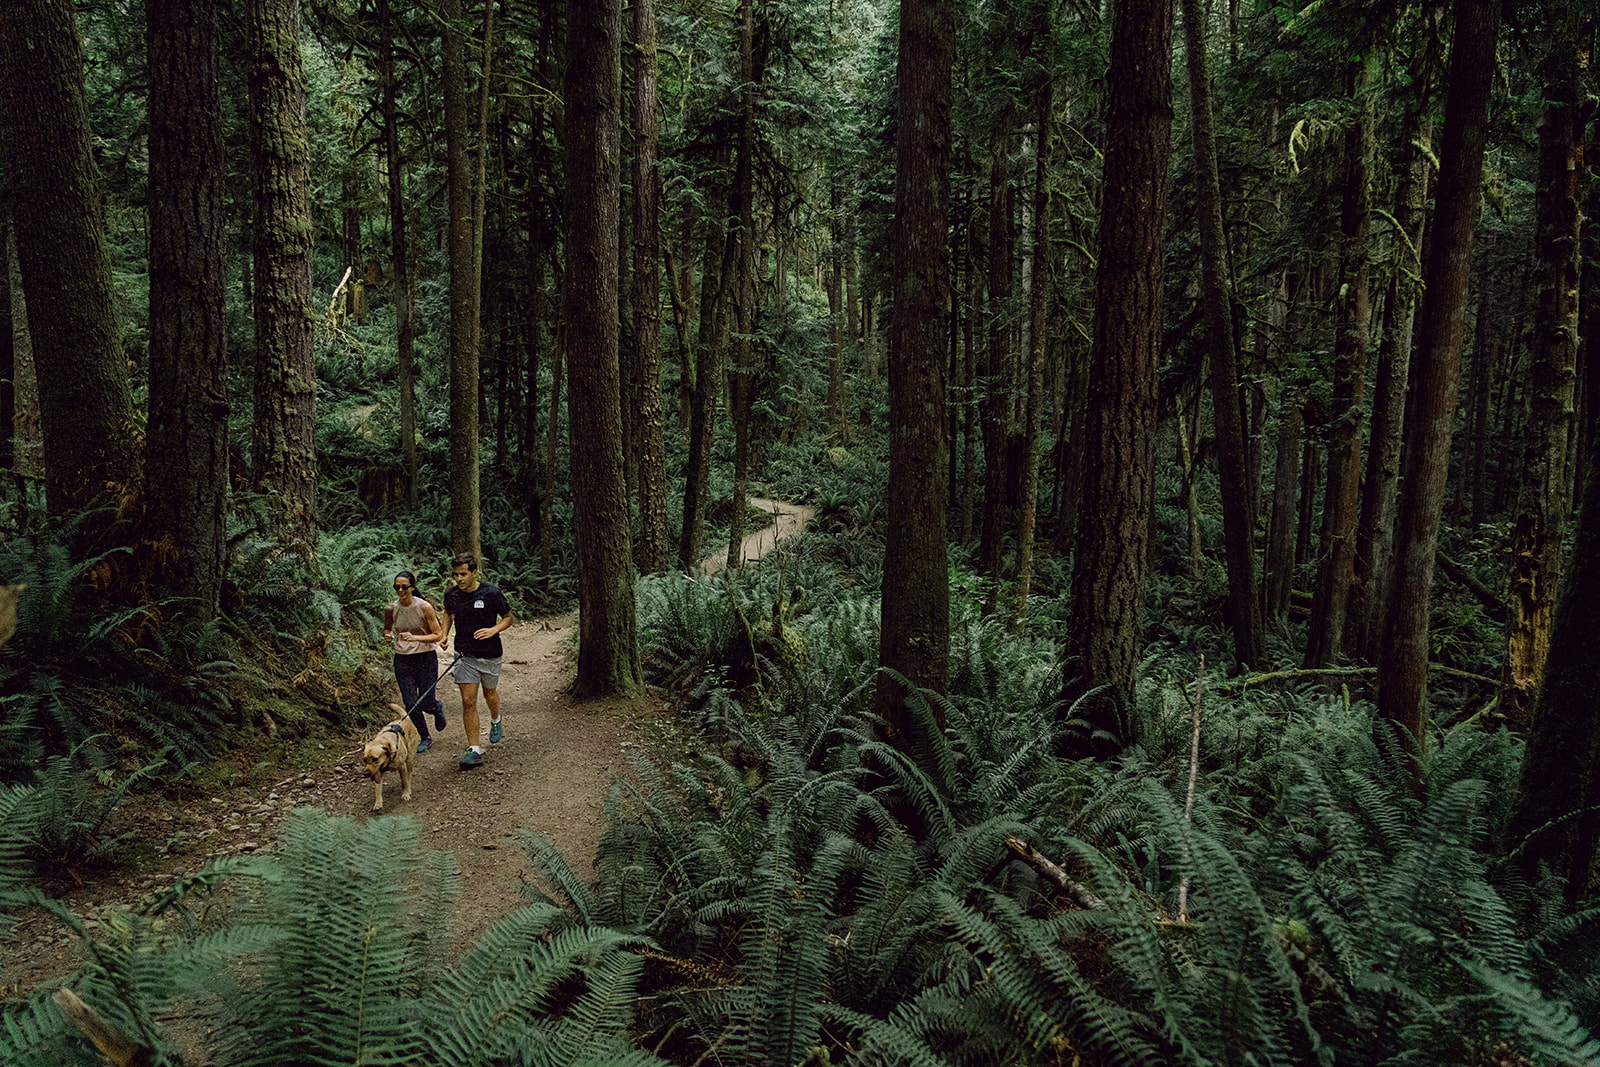 Couple runs in the rainforest to skookumchuk narrows on the morning of their west coast wilderness lodge wedding